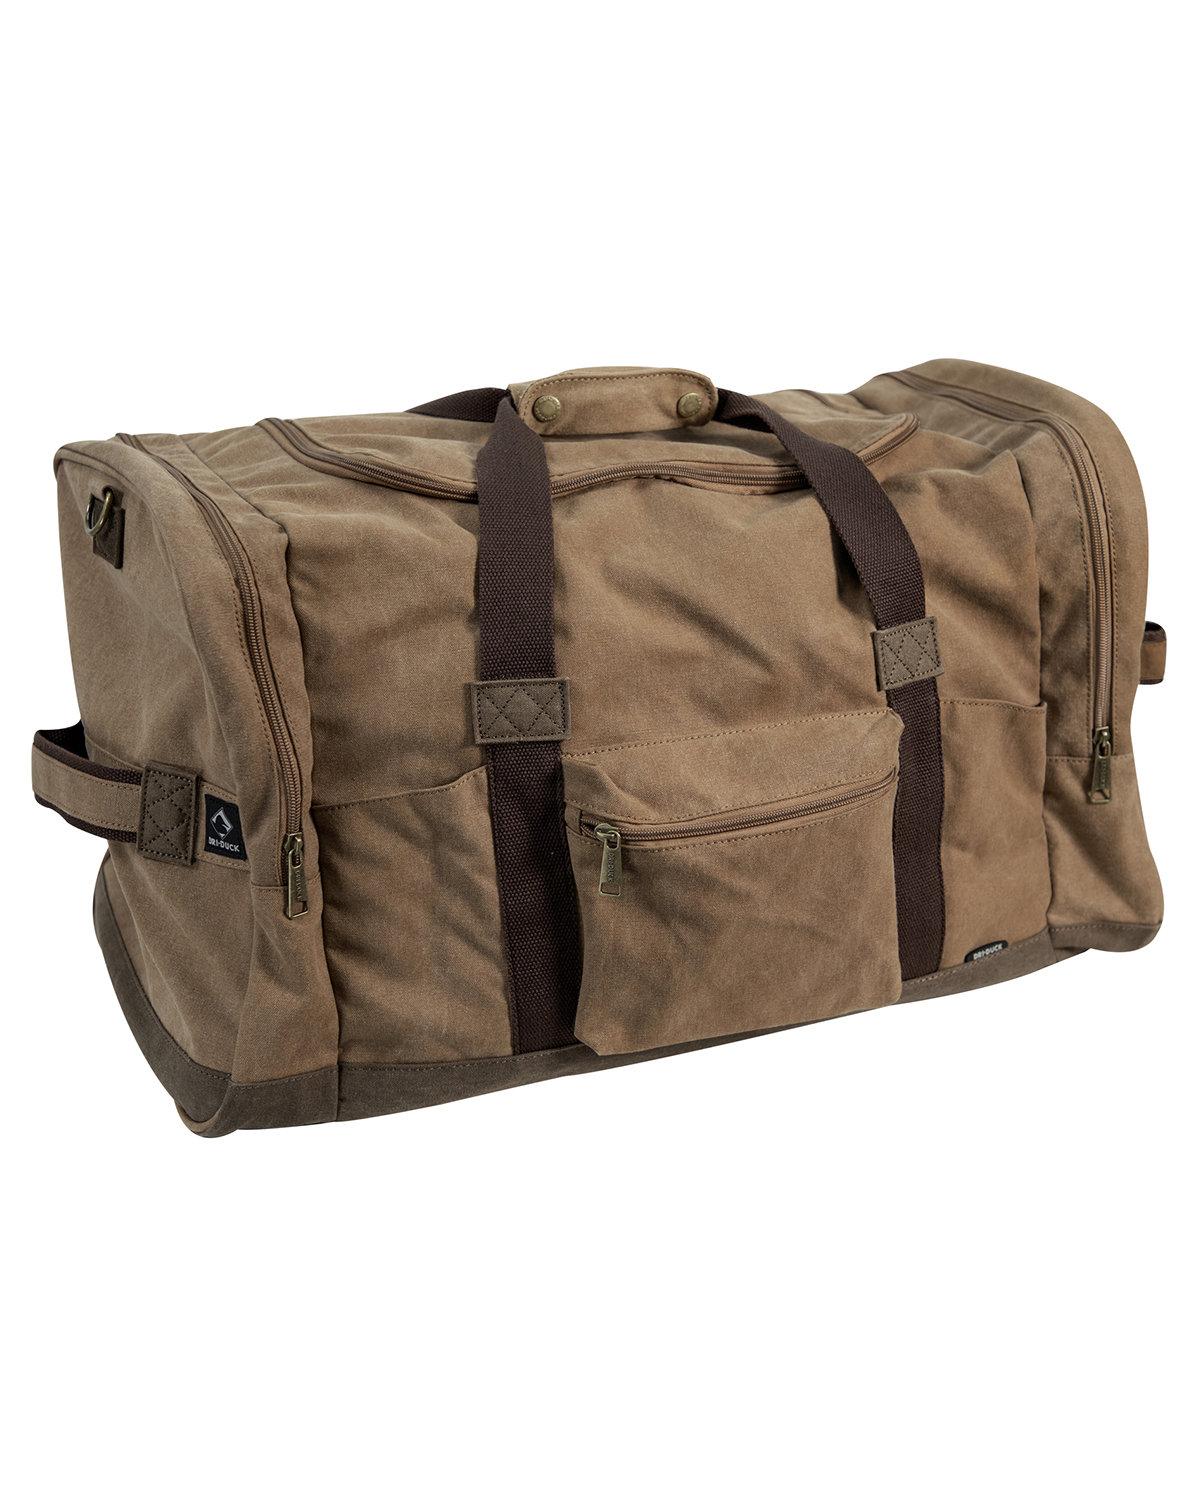 Dri Duck Heavy Duty Large Expedition Canvas Duffle Bag | alphabroder